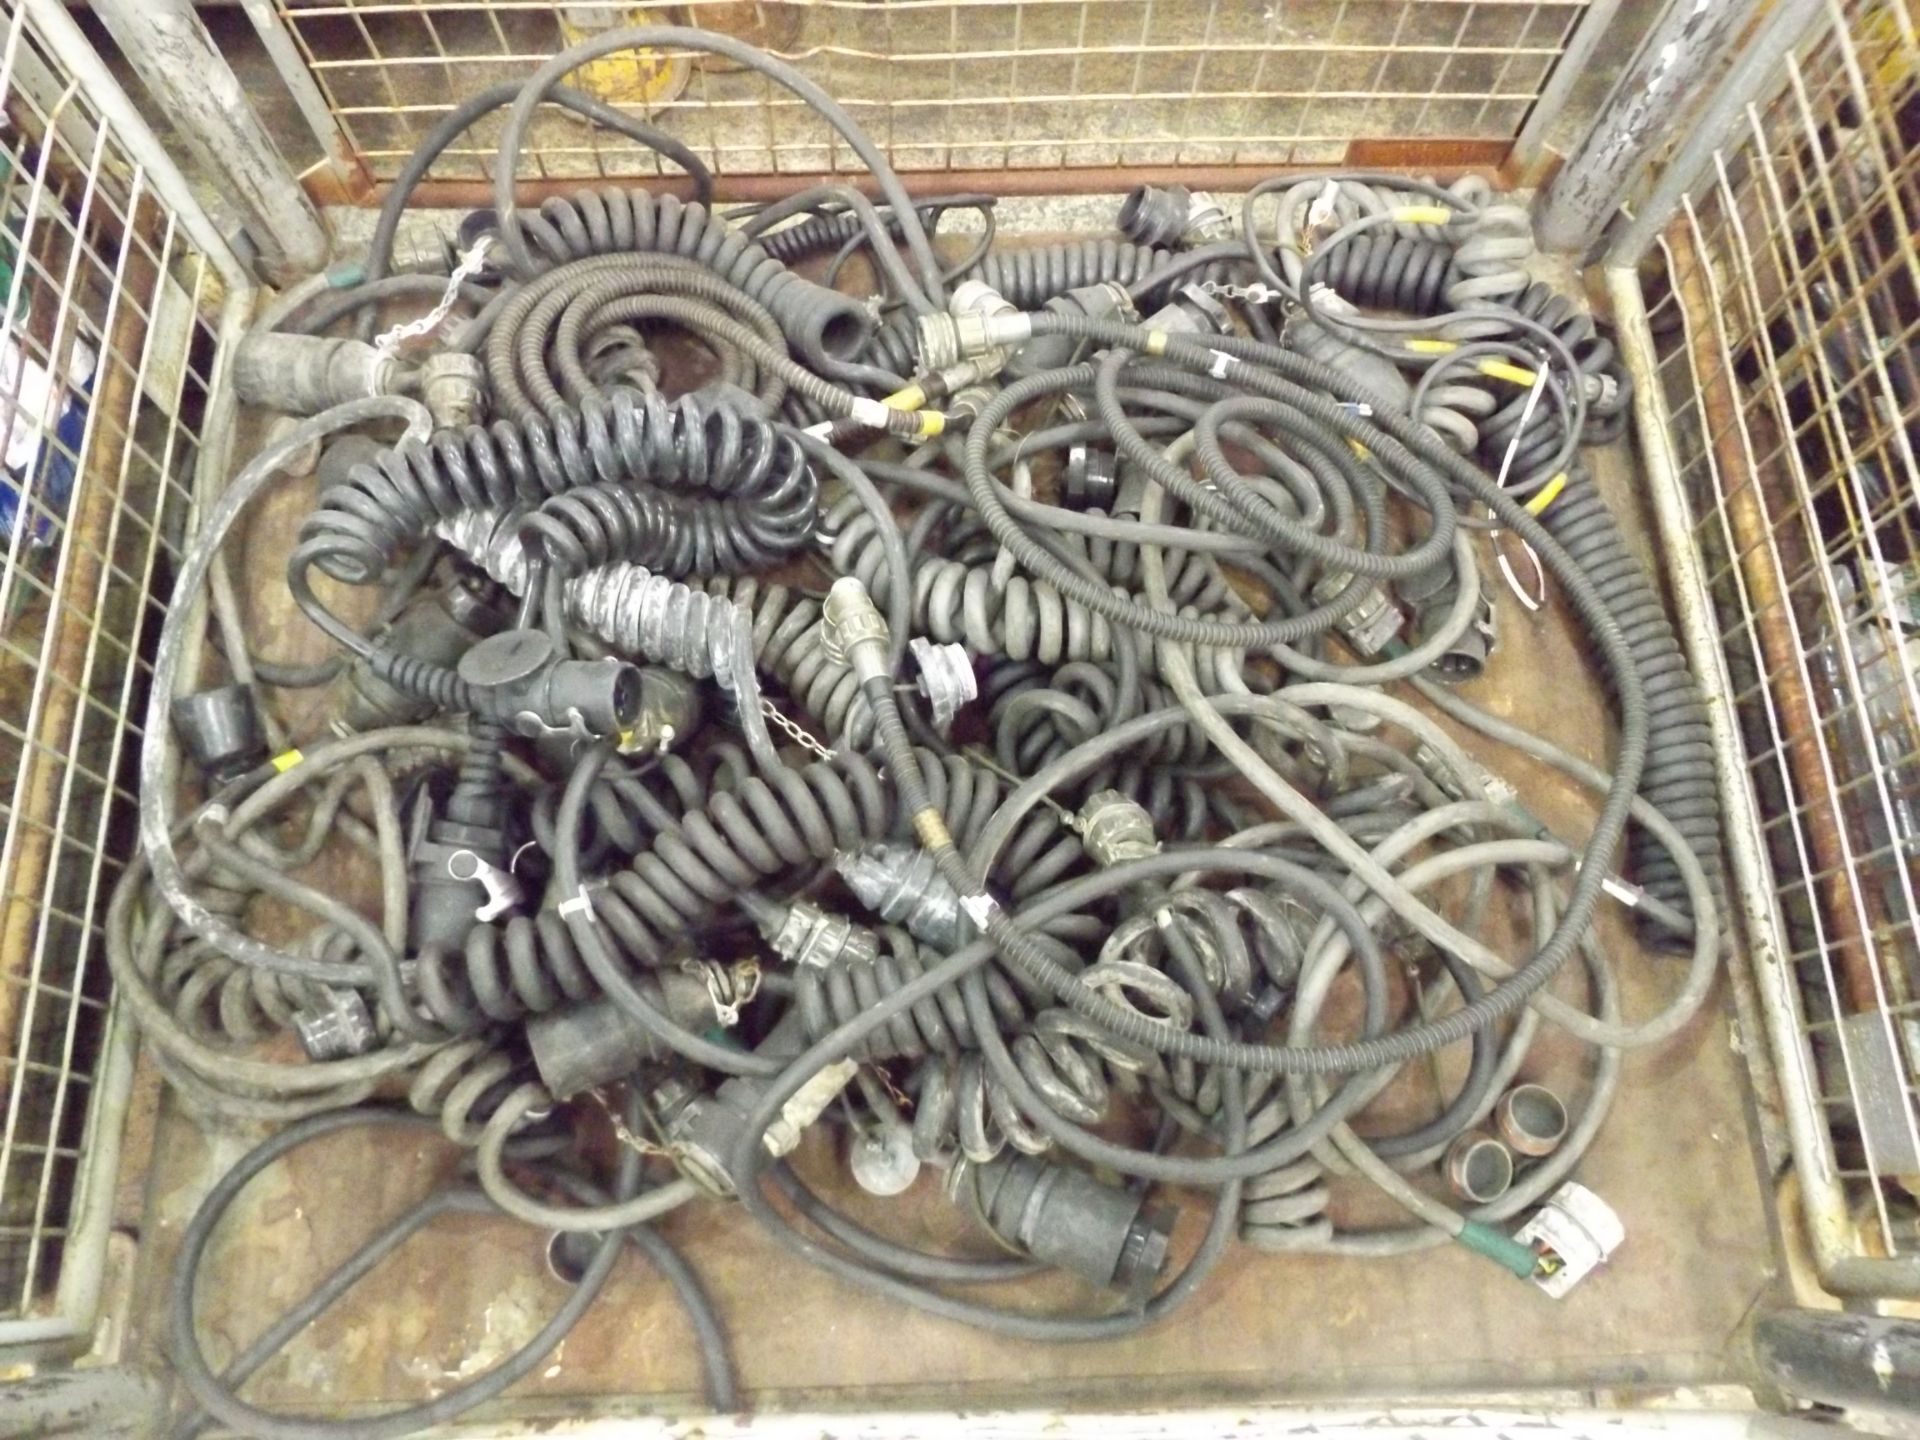 Mixed Stillage of Electrical Cable